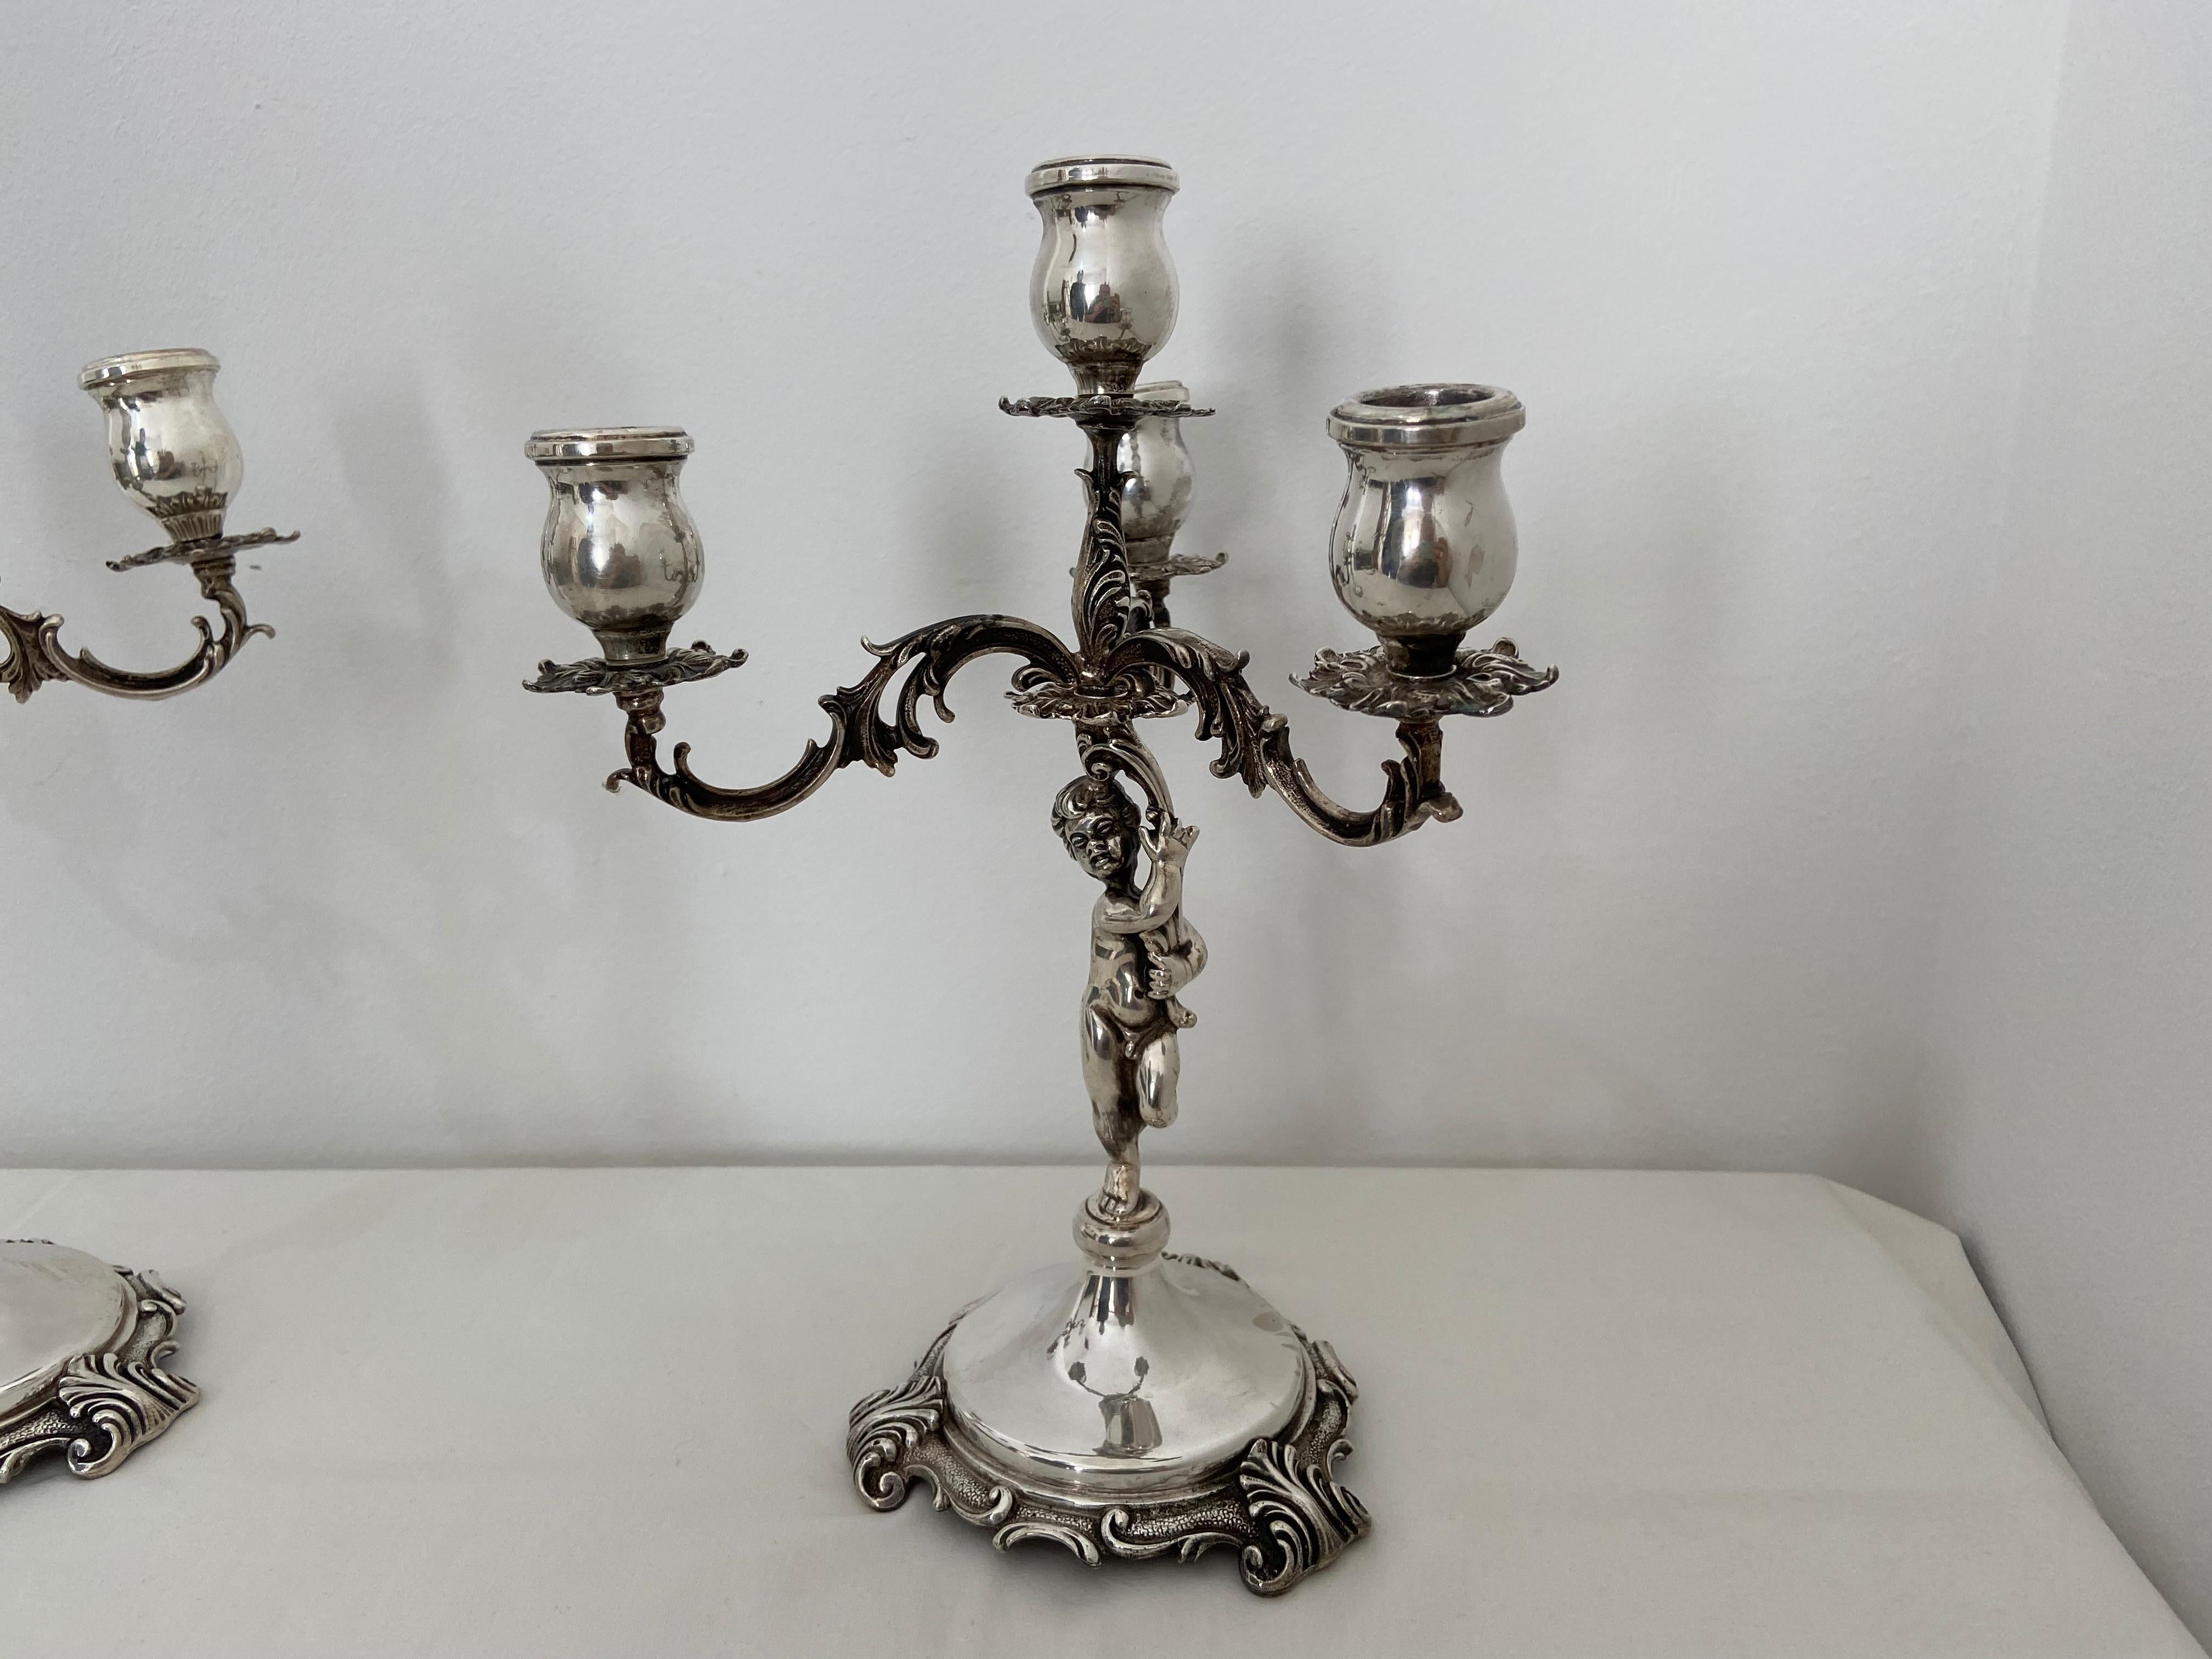 Two Handcrafted Candelabra in 800 Silver, Works of Art In Good Condition For Sale In Palermo, IT